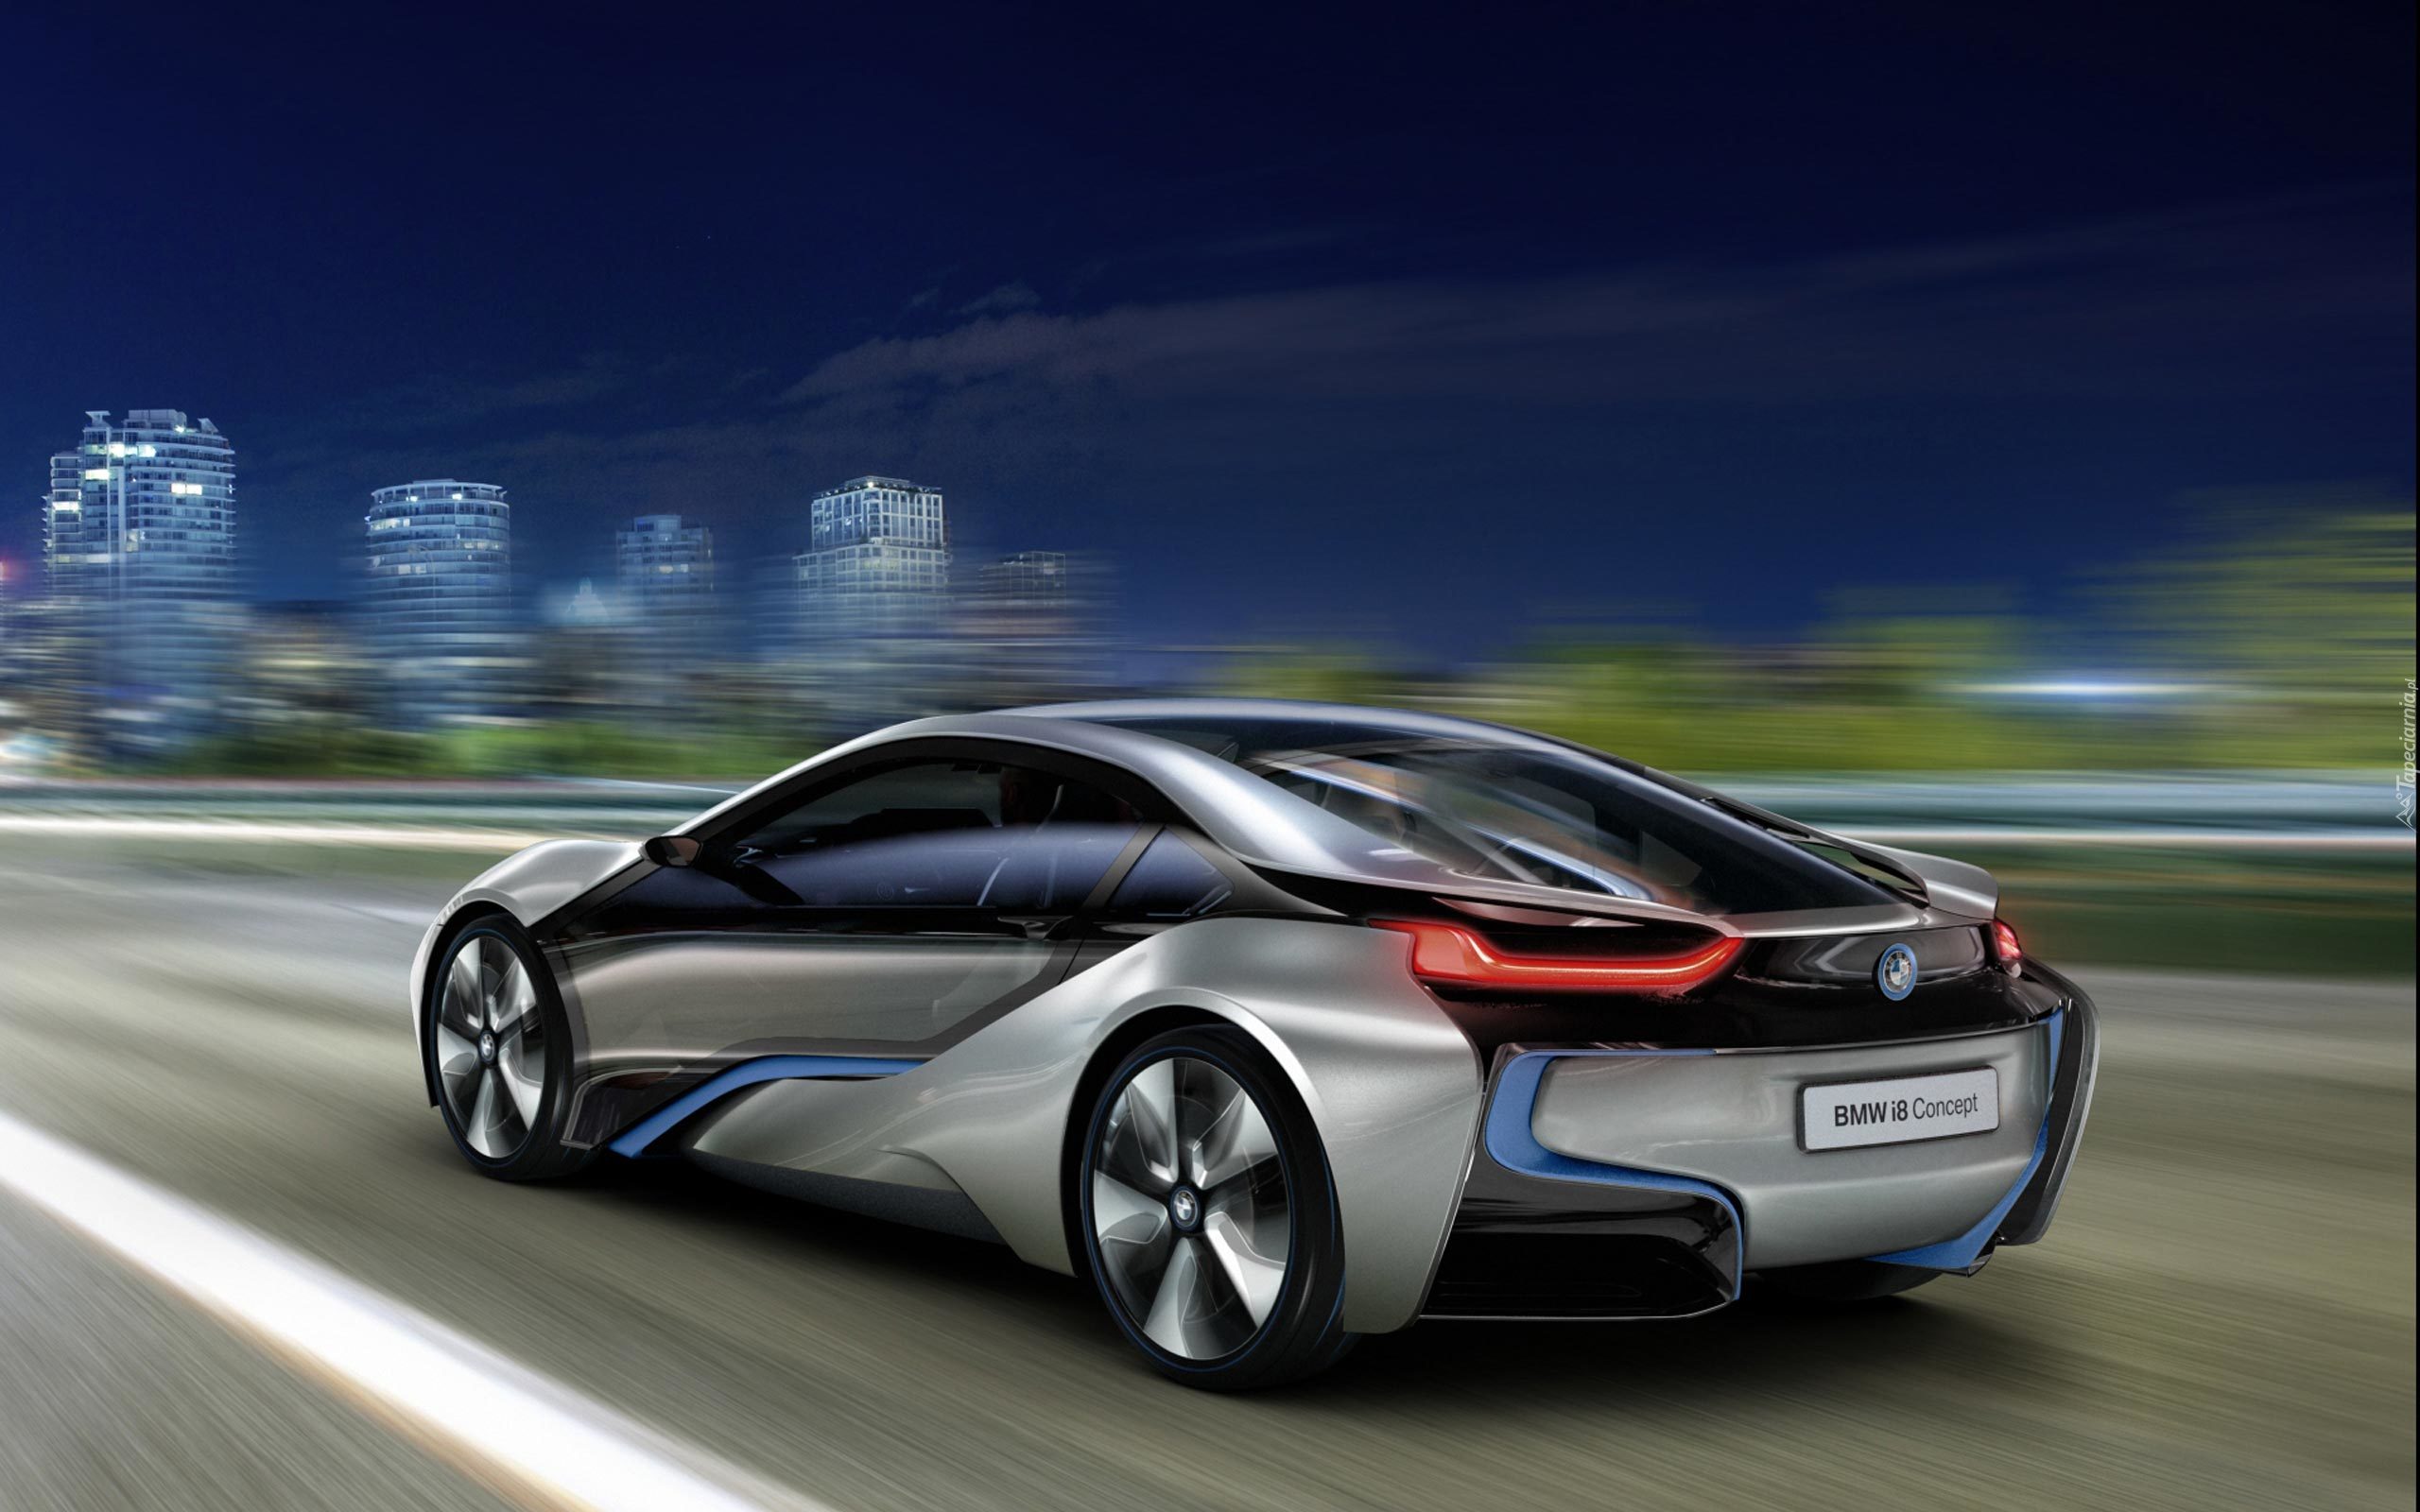 BMW i8 Coupe, Concept, 2013